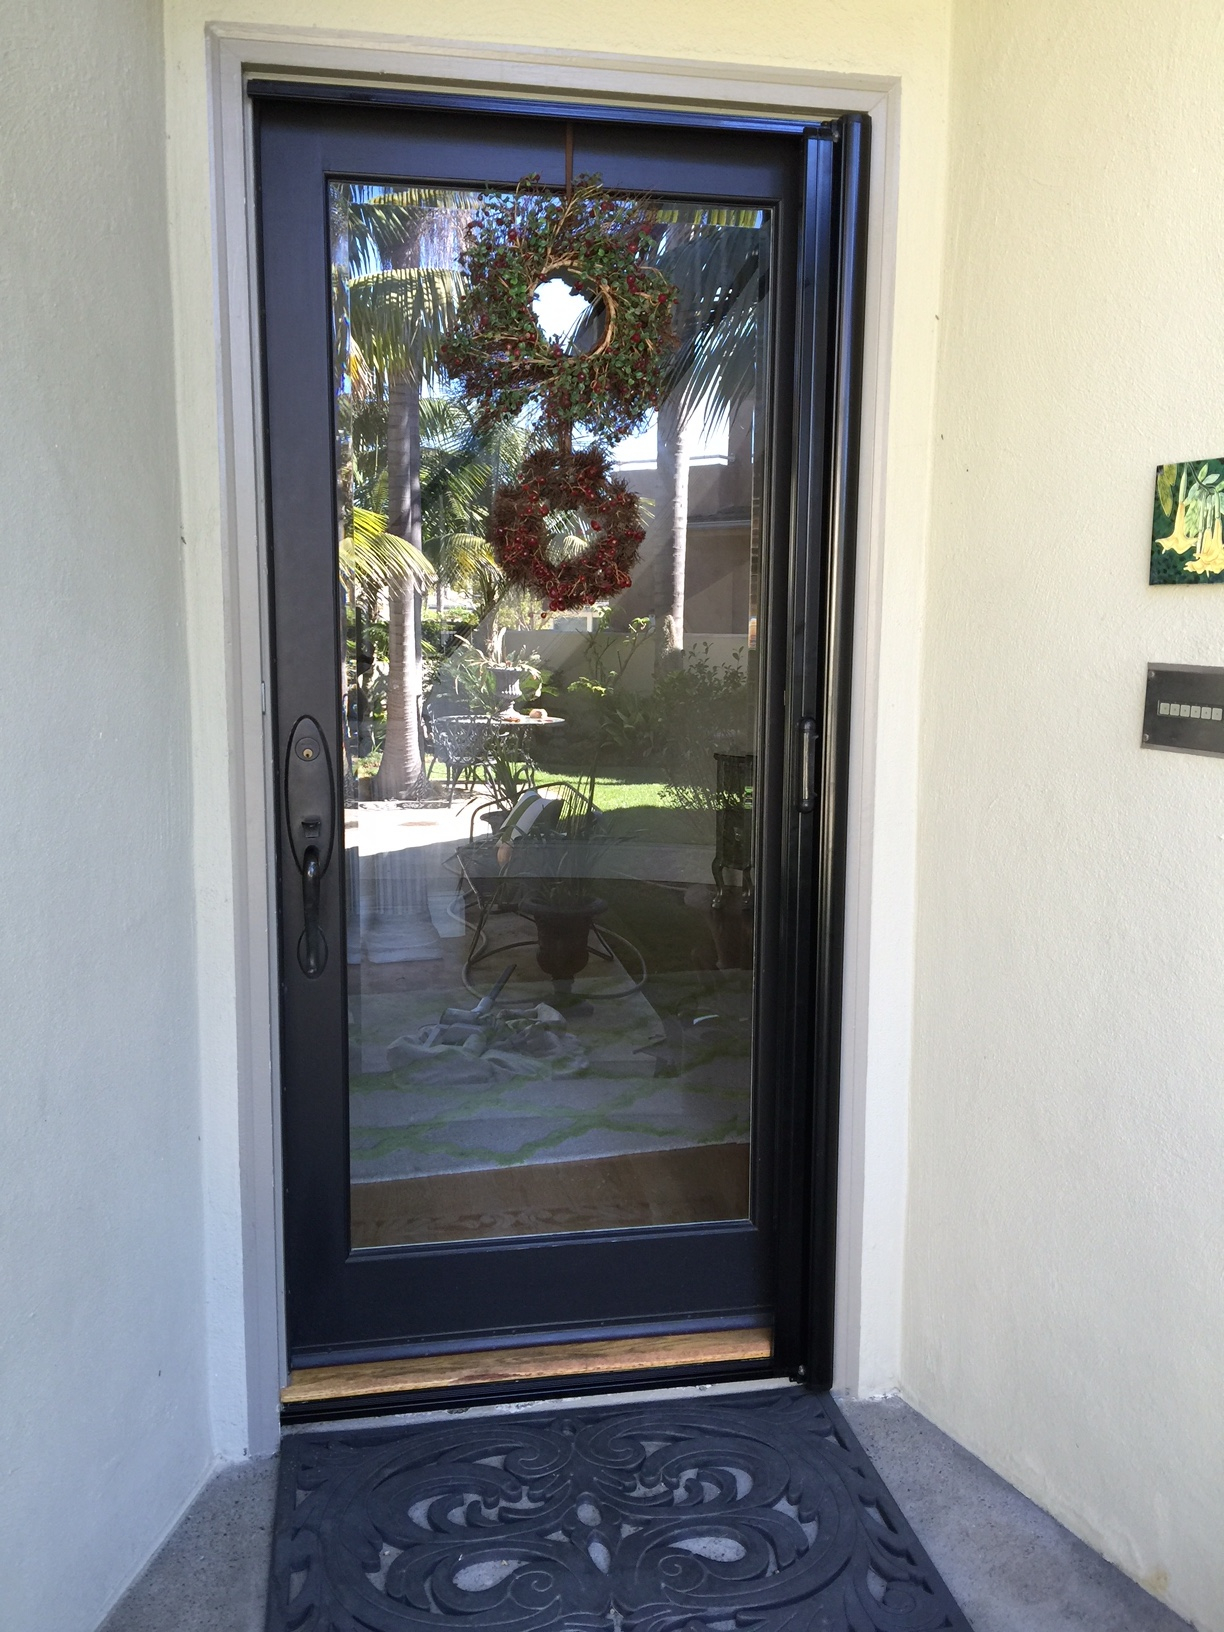 Clear View Retractable Screen Door Pictures And Recent Installations with sizing 1224 X 1632